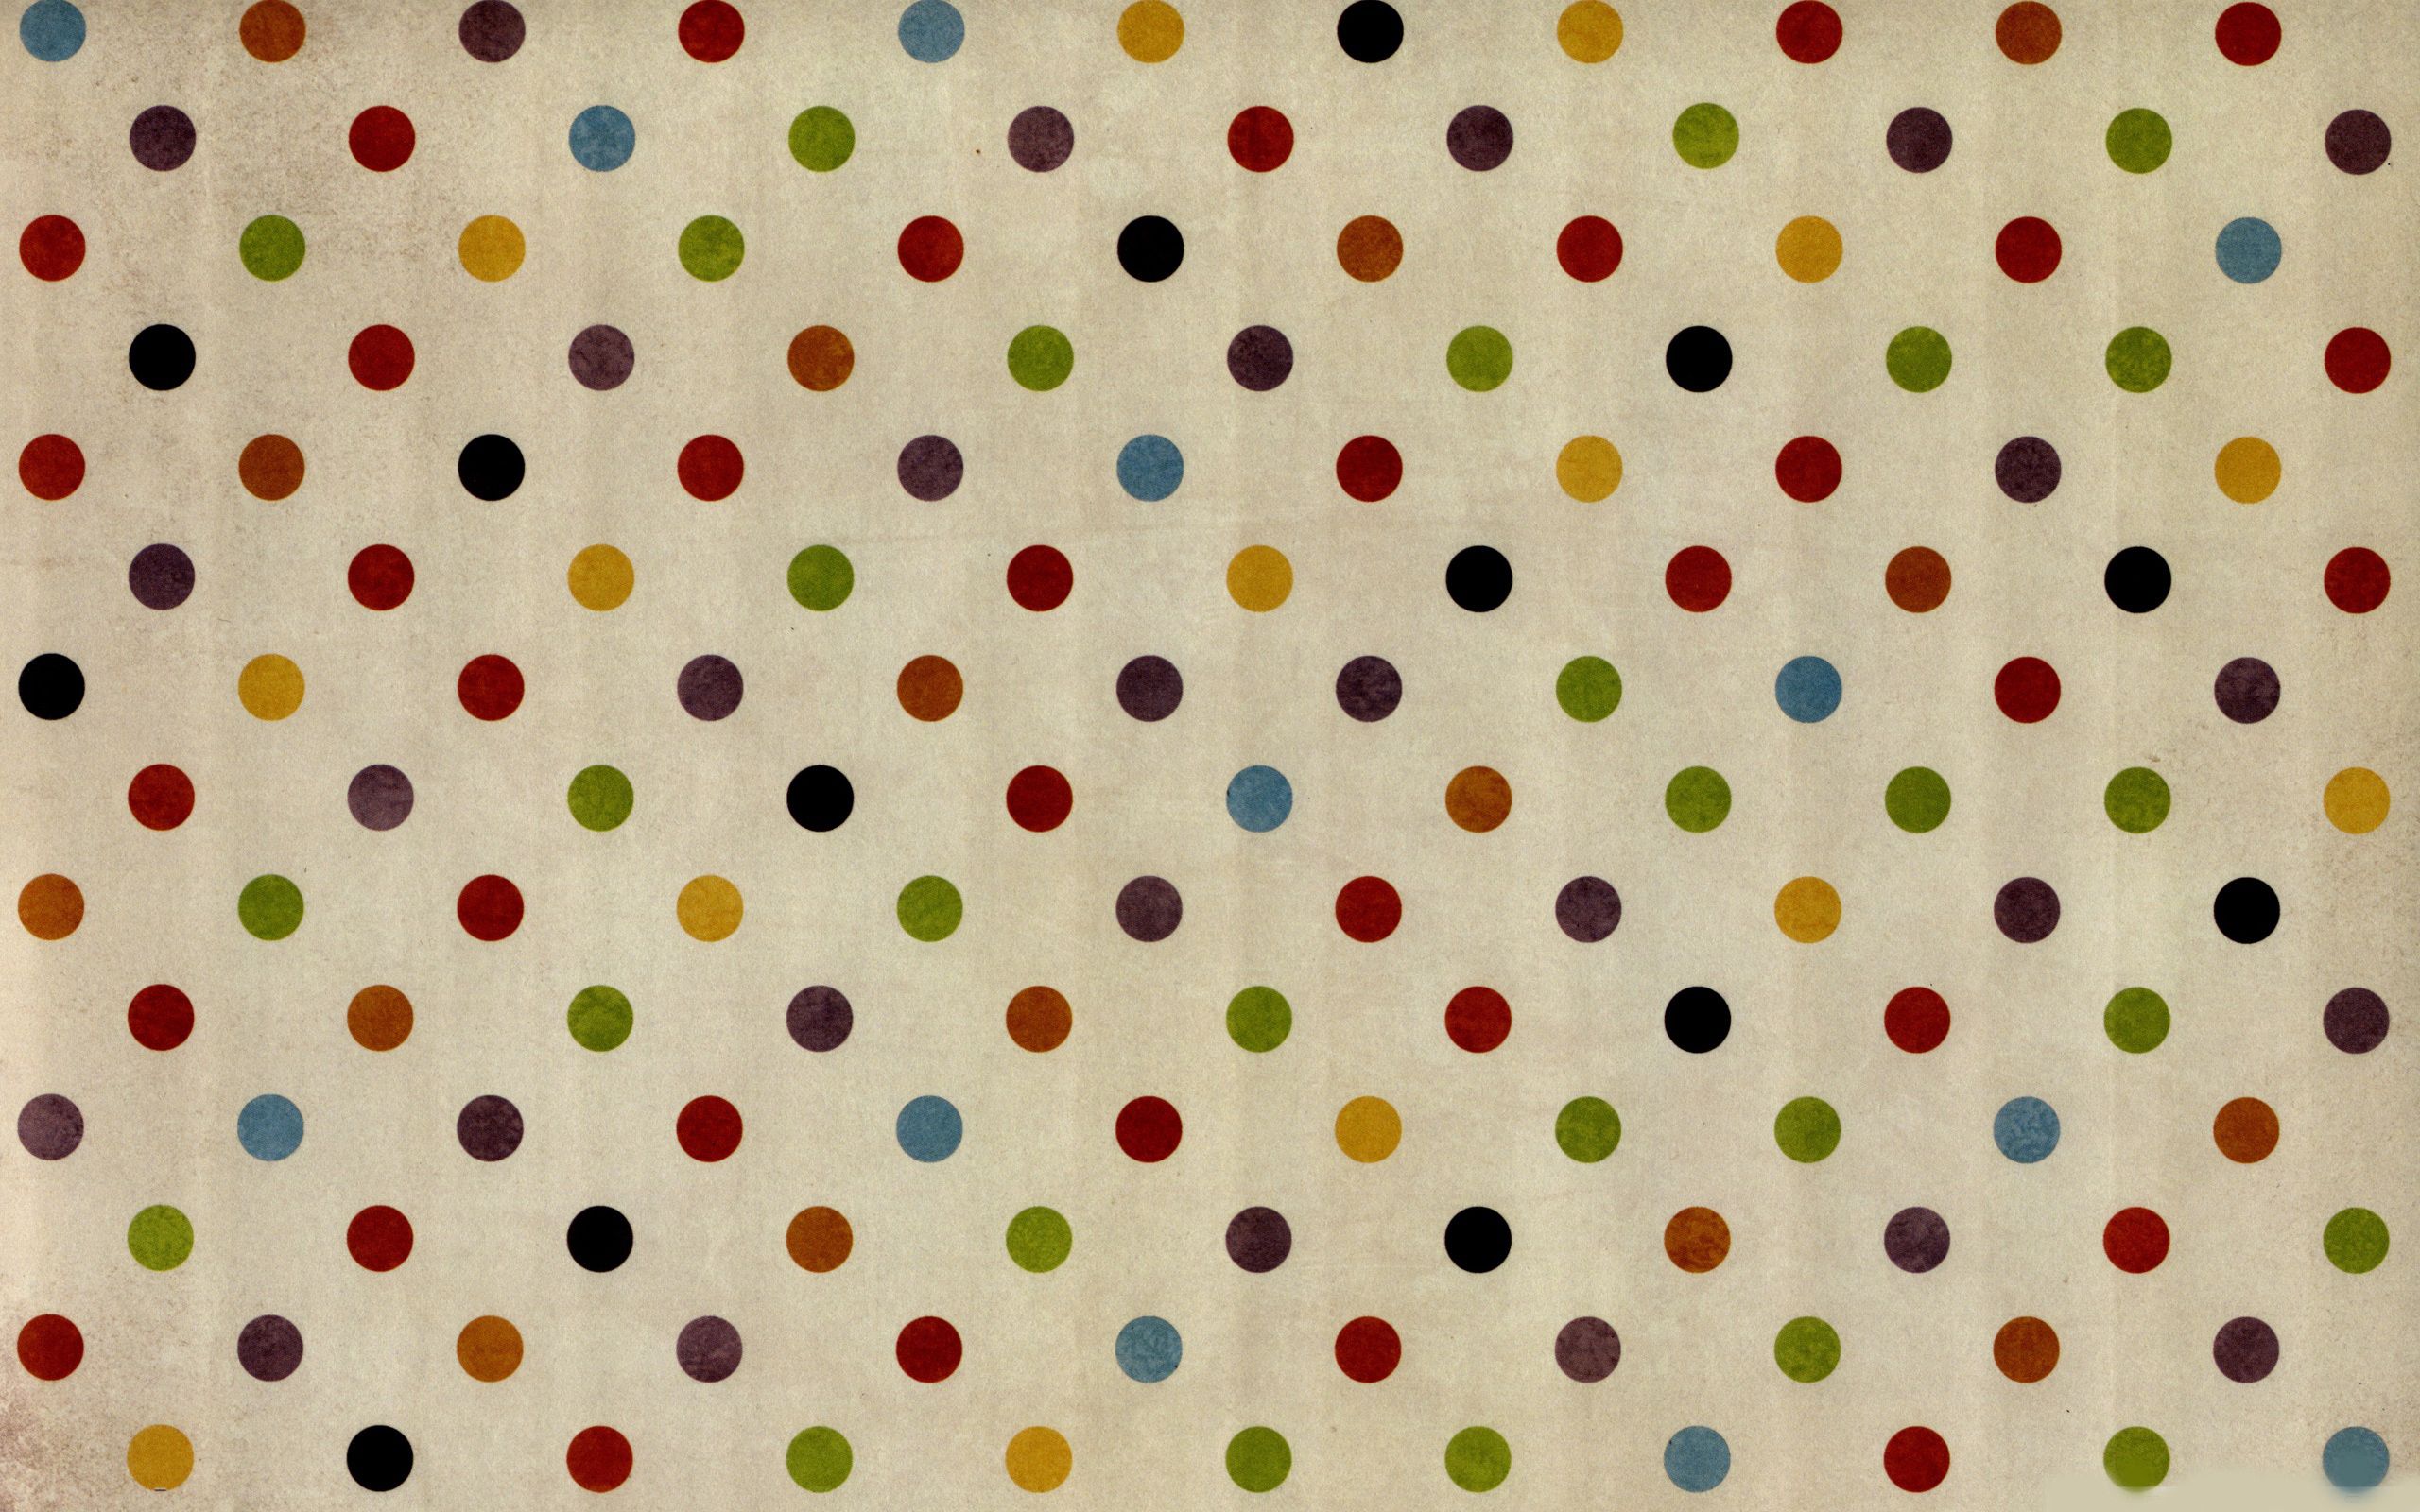 motley, textures, texture, circles, multicolored, surface wallpapers for tablet